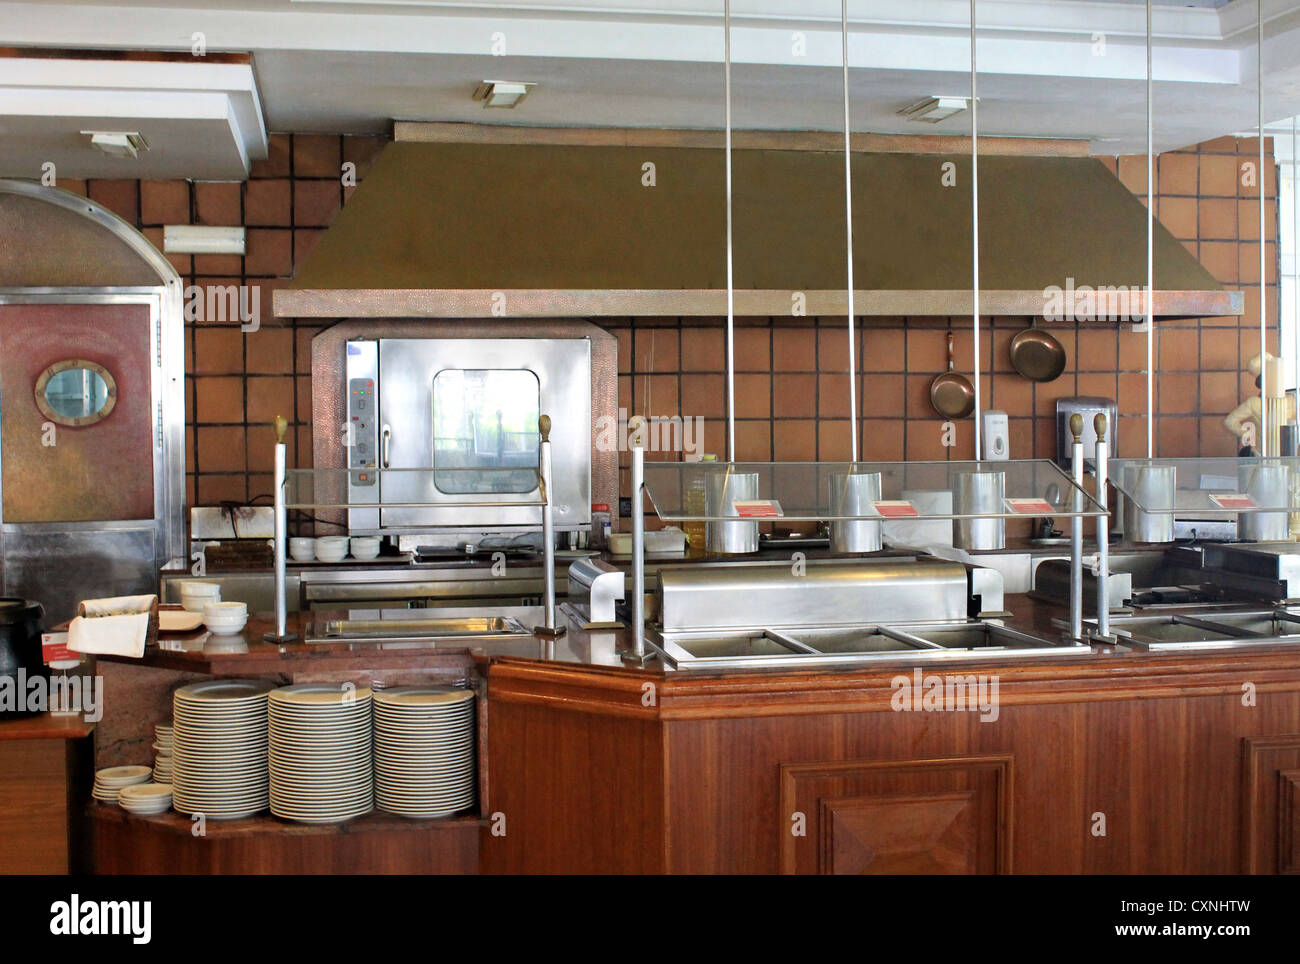 Modern commercial kitchen in hotel, restaurant or business. Stock Photo